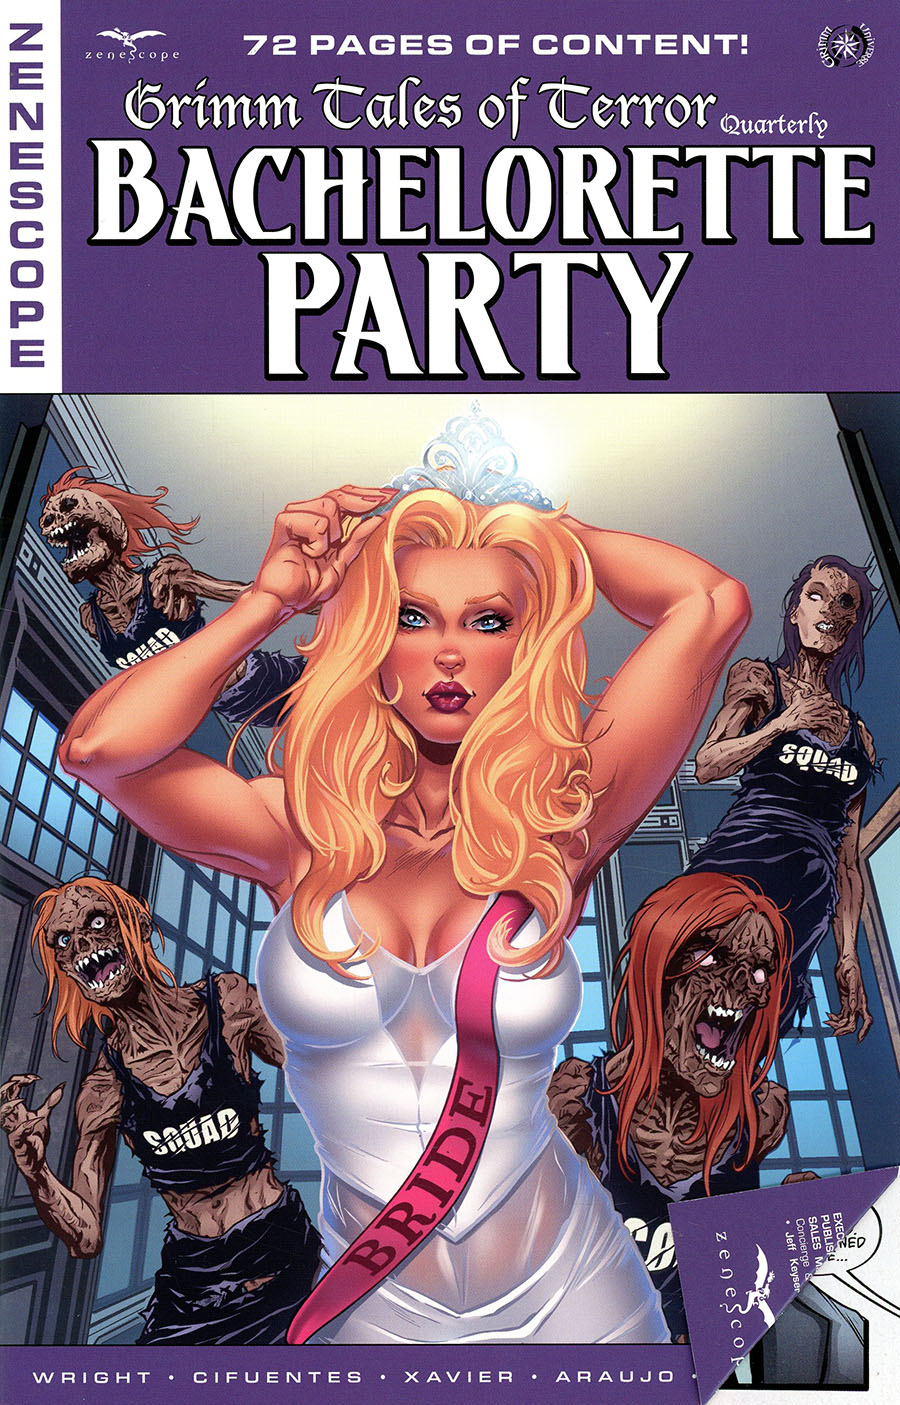 Grimm Fairy Tales Presents Grimm Tales Of Terror Quarterly #4 Bachelorette Party Cover B Riveiro